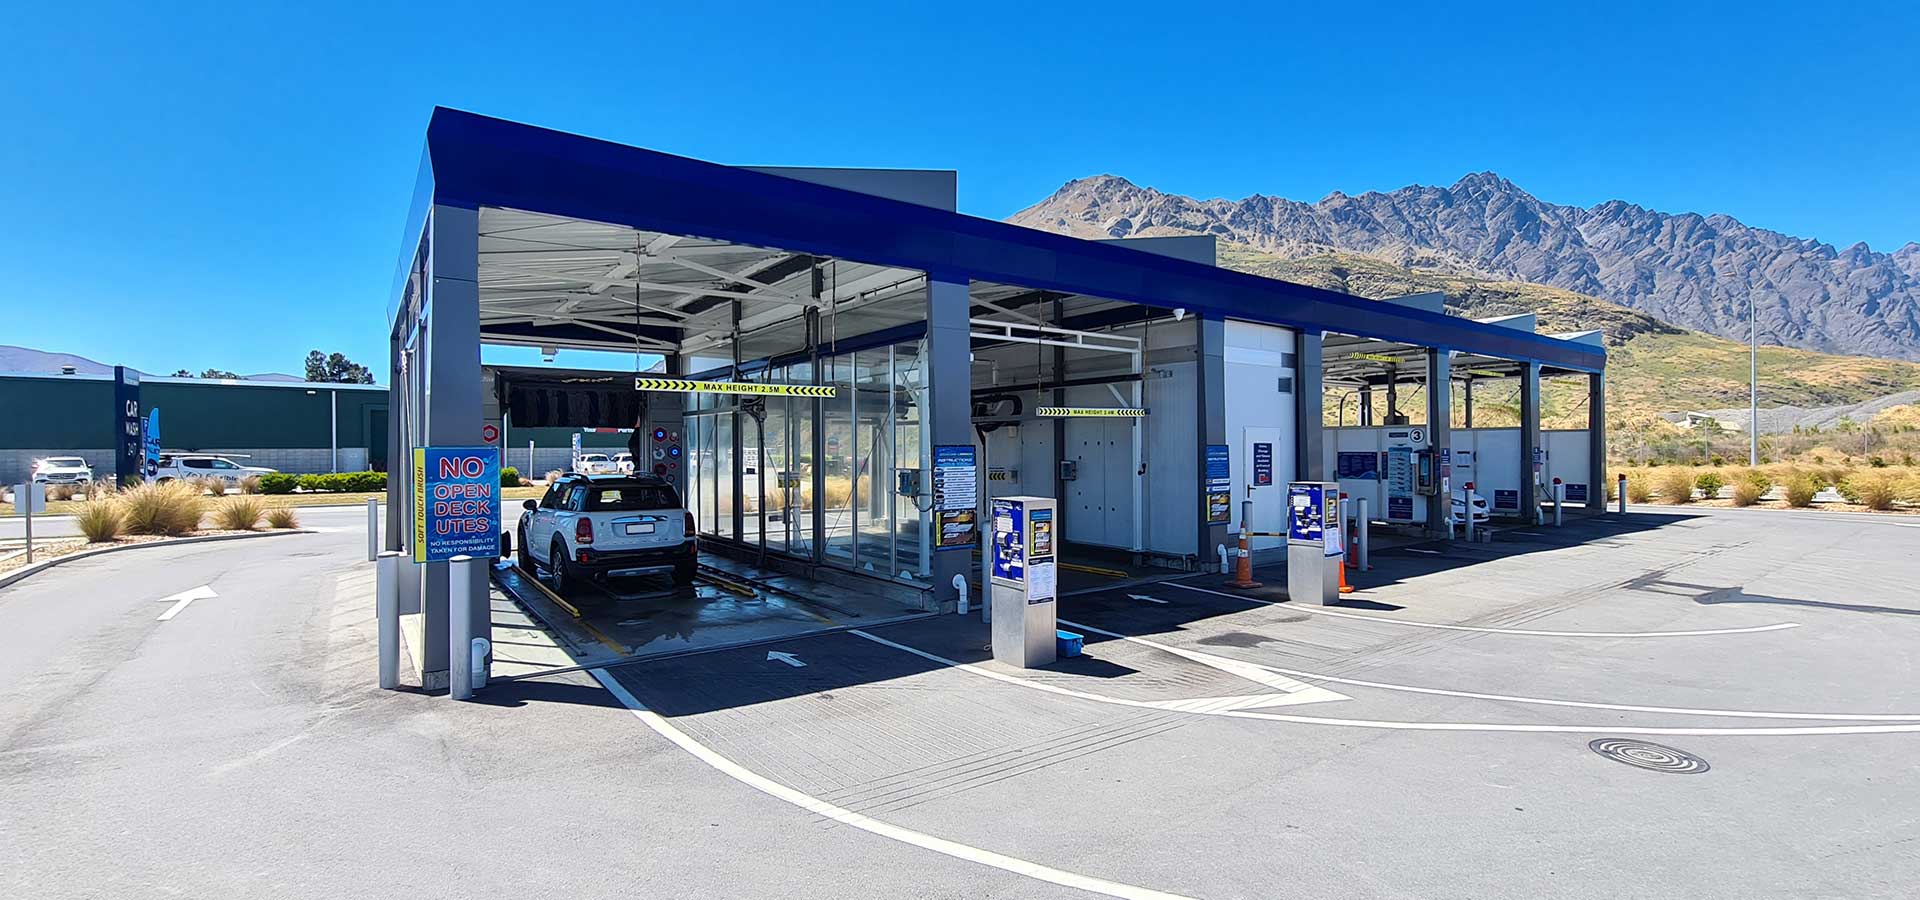 How to Pay at Queenstown Carwash